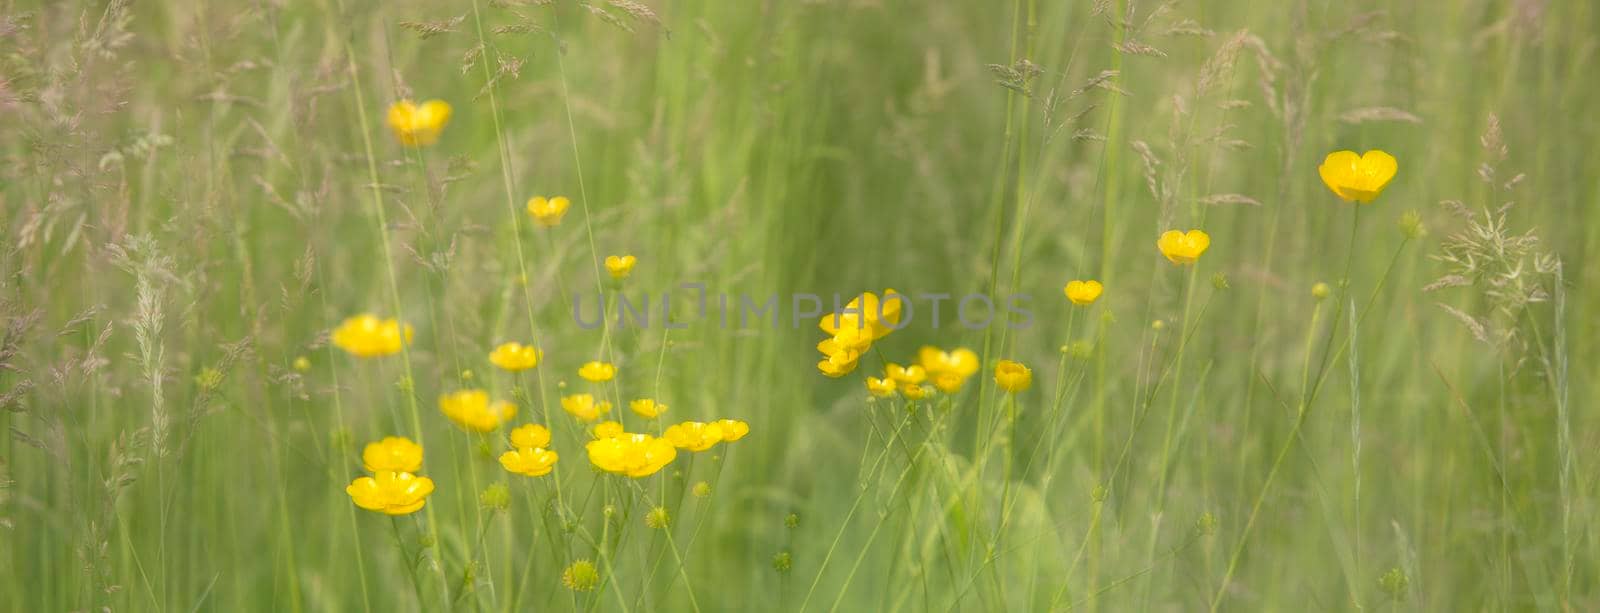 yellow buttercup flowers on green background with grasses in dreamy fantasy abstract pattern of multiple exposure